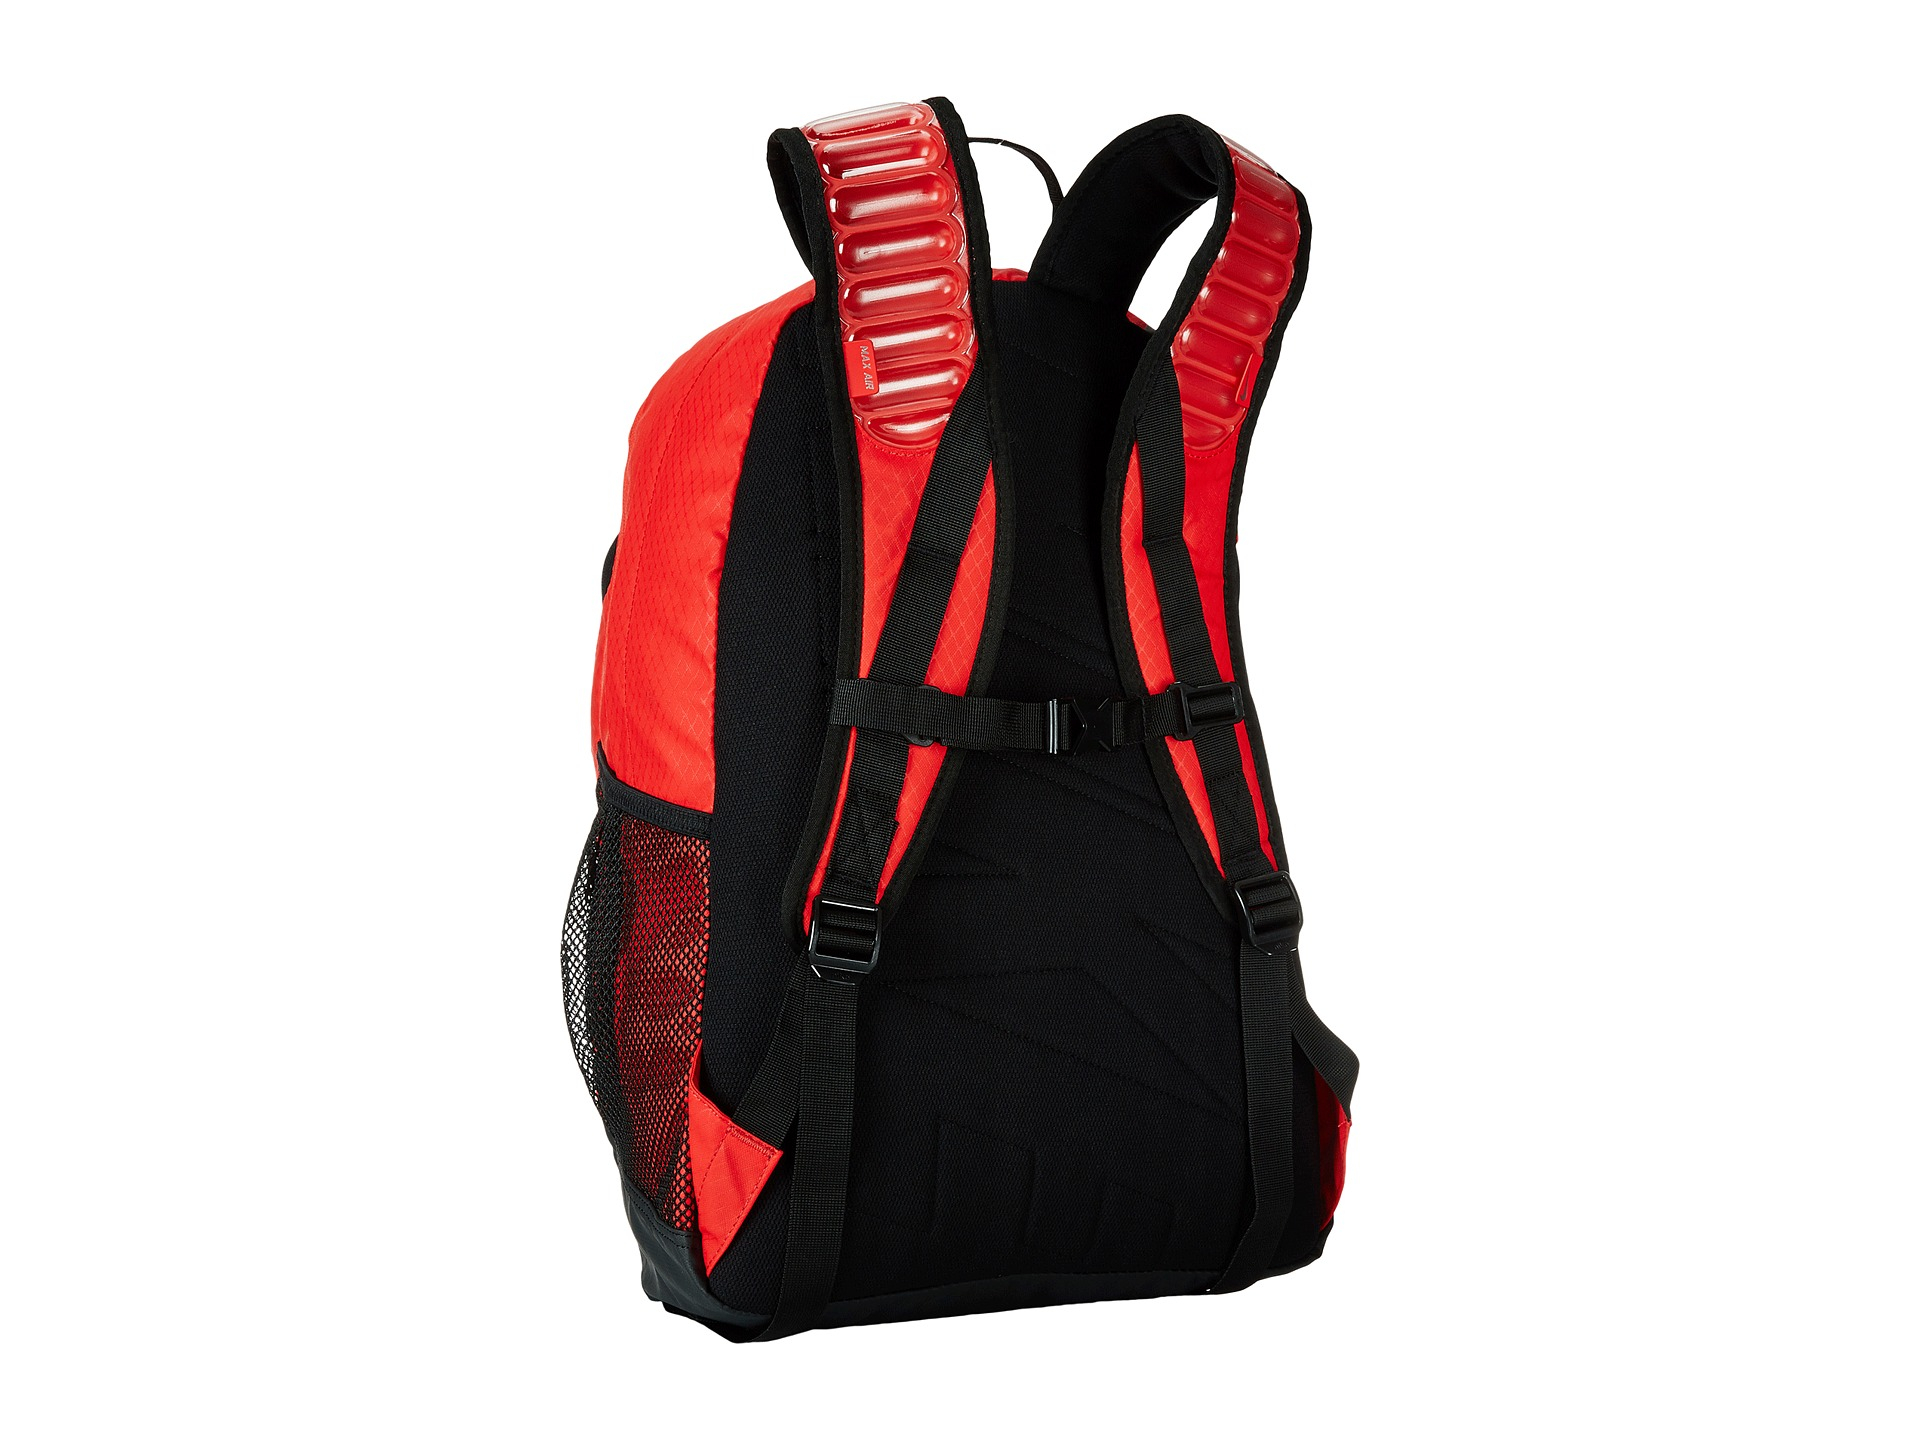 nike max air large vapor superfly backpack